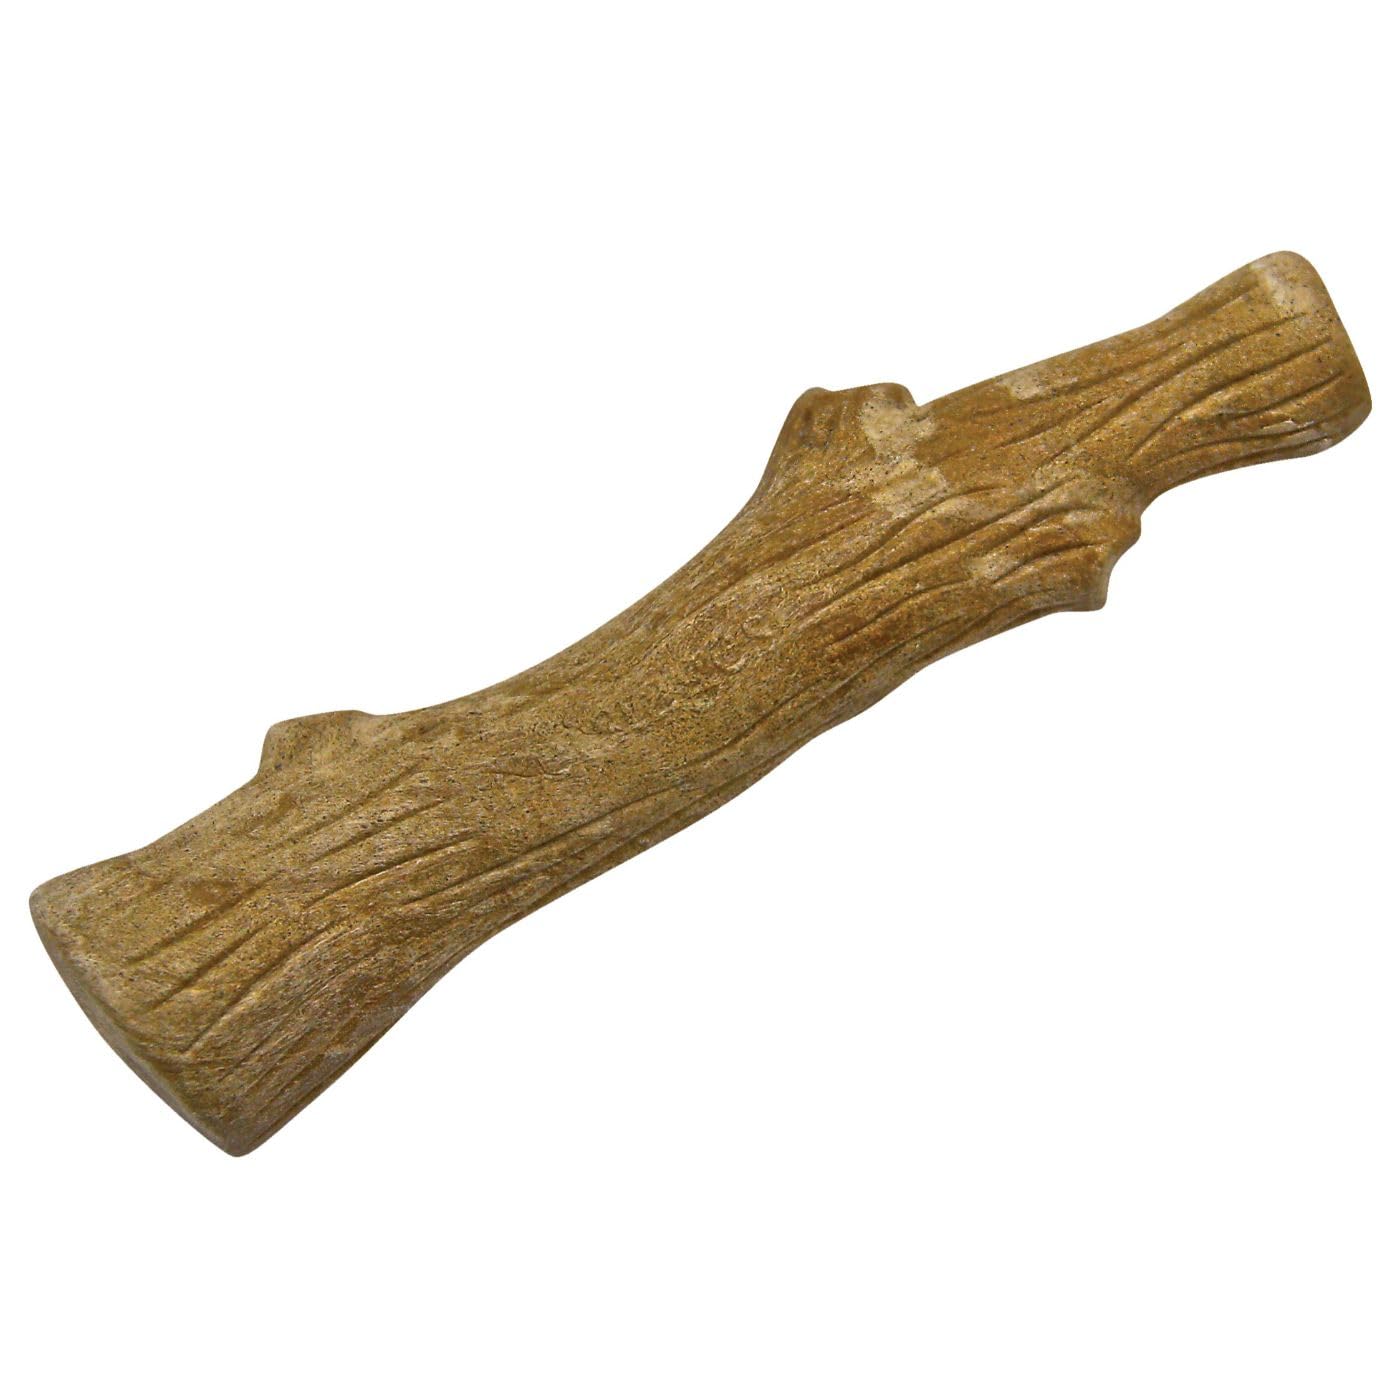 Petstages Dogwood Alternative Dog Chew Toy (Small) $3.03 + Free Shipping on $35+